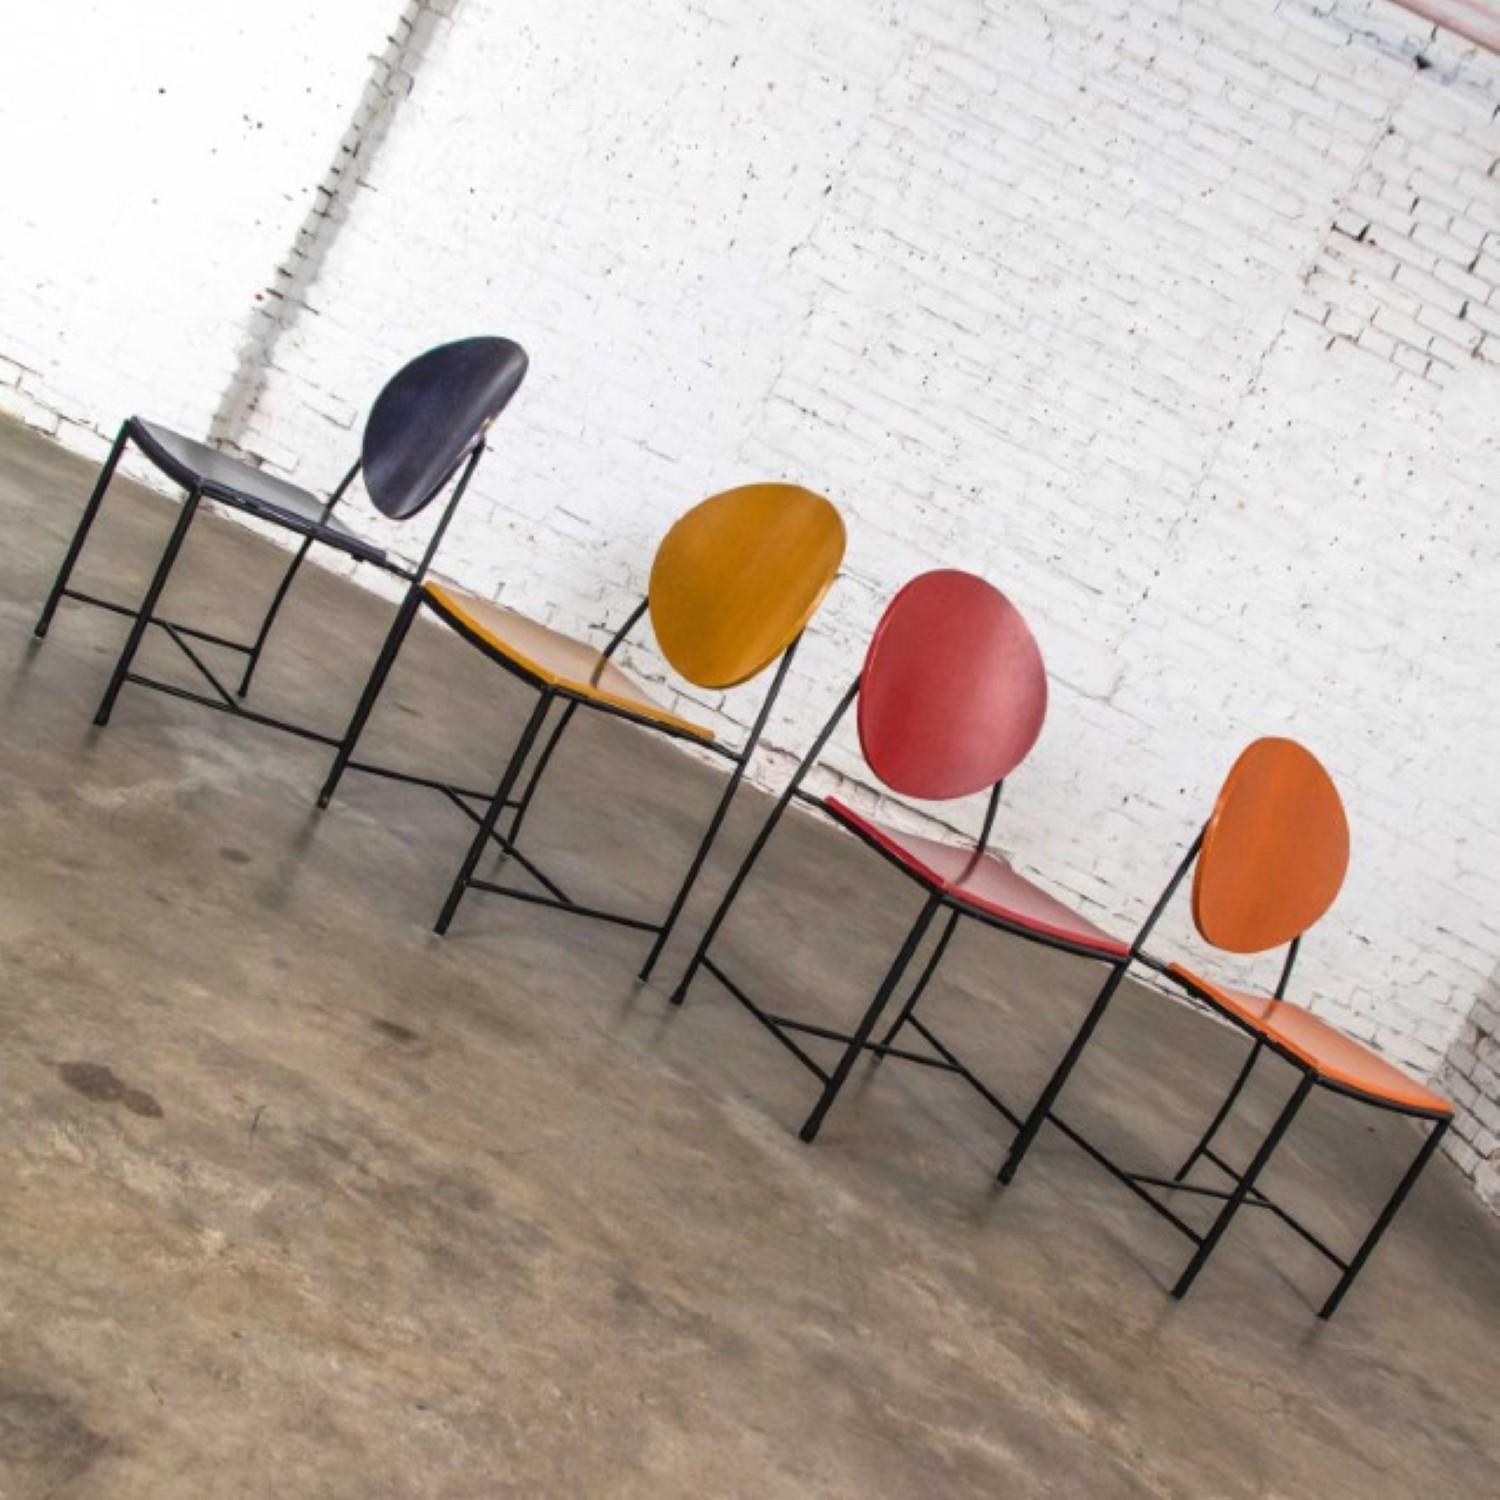 This is a special listing for ANDERS: FINAL PAYMENT FOR REFINISHING AND SHIPPING COSTS

18 Red Chairs
16 Yellow Chairs - ENDED UP WITH 15 YELLOW
13 Blue Chairs - ENDED UP WITH 14 BLUE
8 Orange Chairs
TOTAL: 55 Chairs @ $225 each labor to refinish =